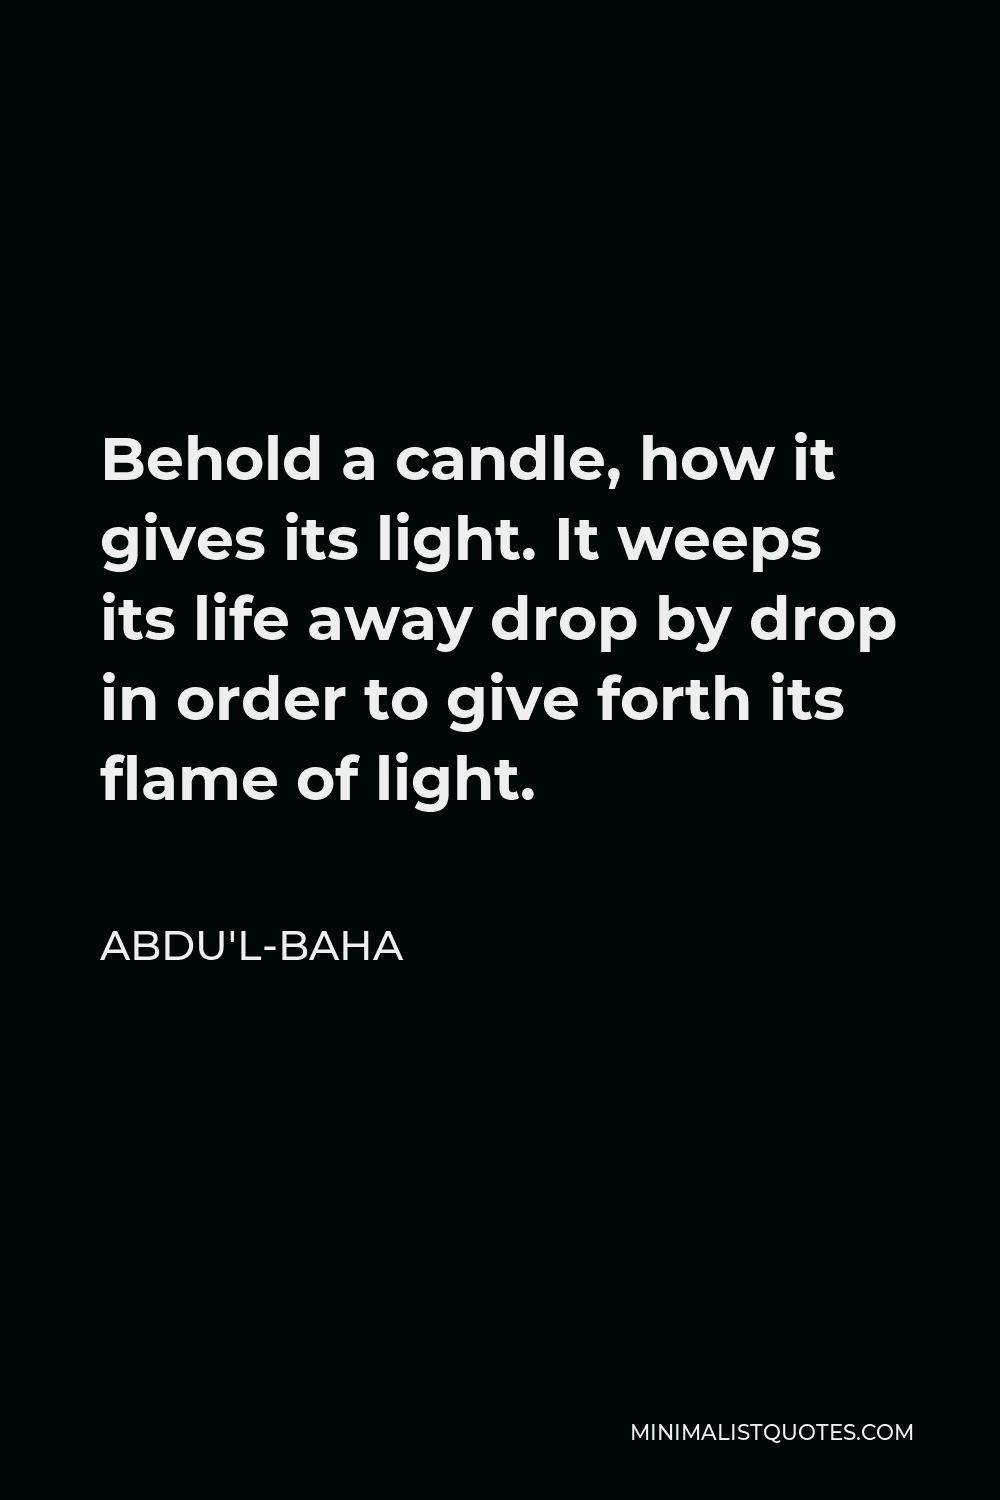 Abdu'l-Baha Quote - Behold a candle, how it gives its light. It weeps its life away drop by drop in order to give forth its flame of light.